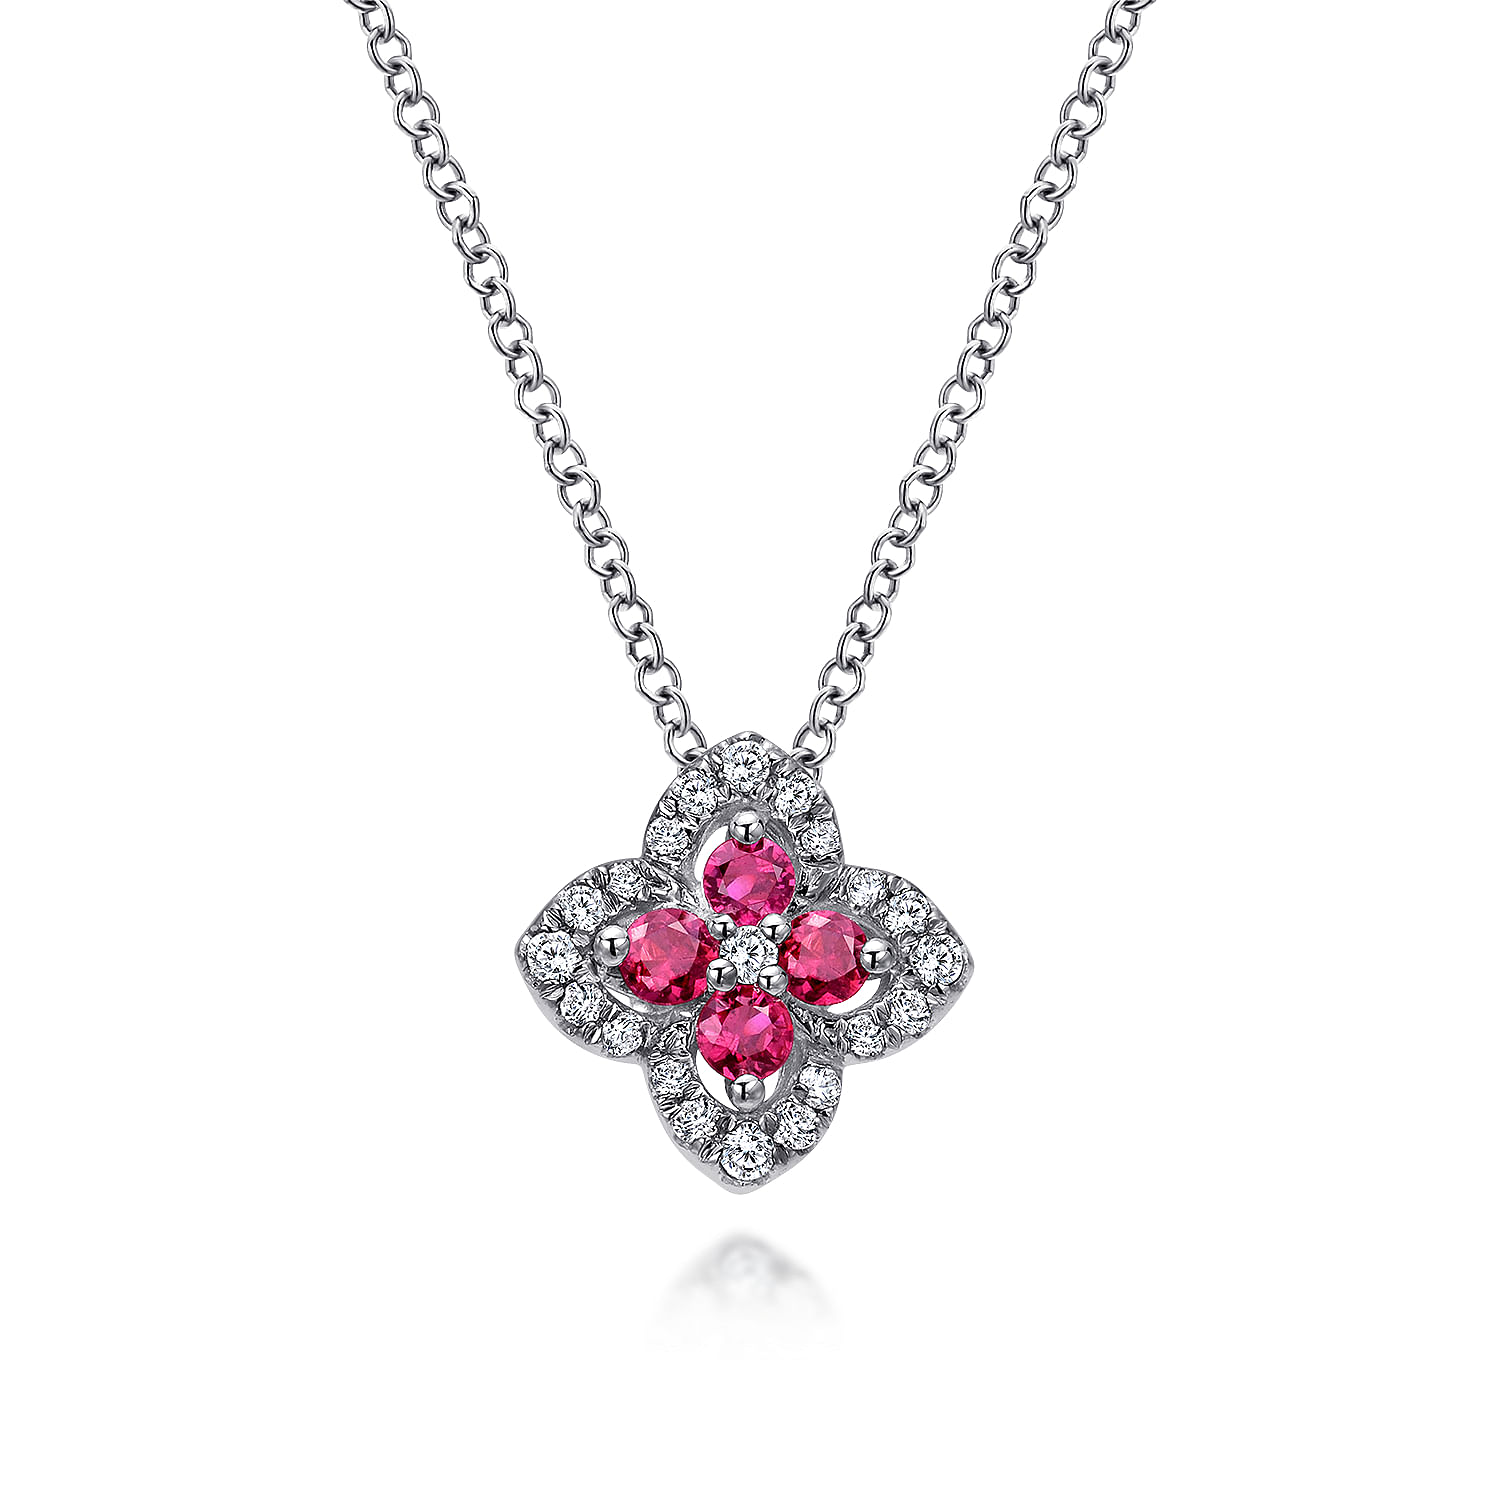 14K White Gold Floral Ruby and Diamond Pendant Necklace